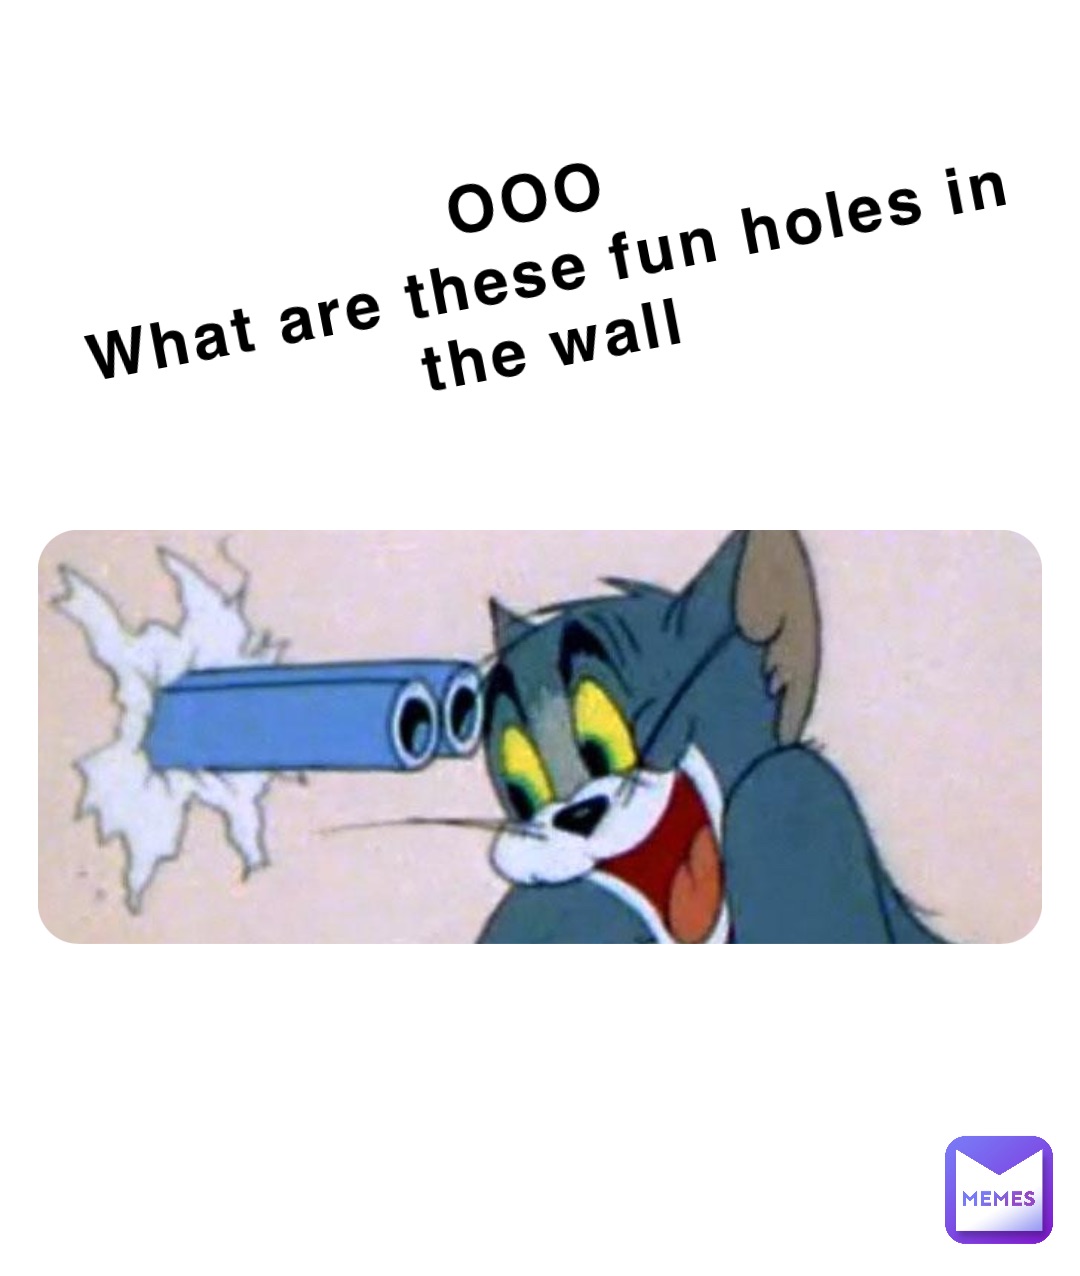 OOO
What are these fun holes in the wall